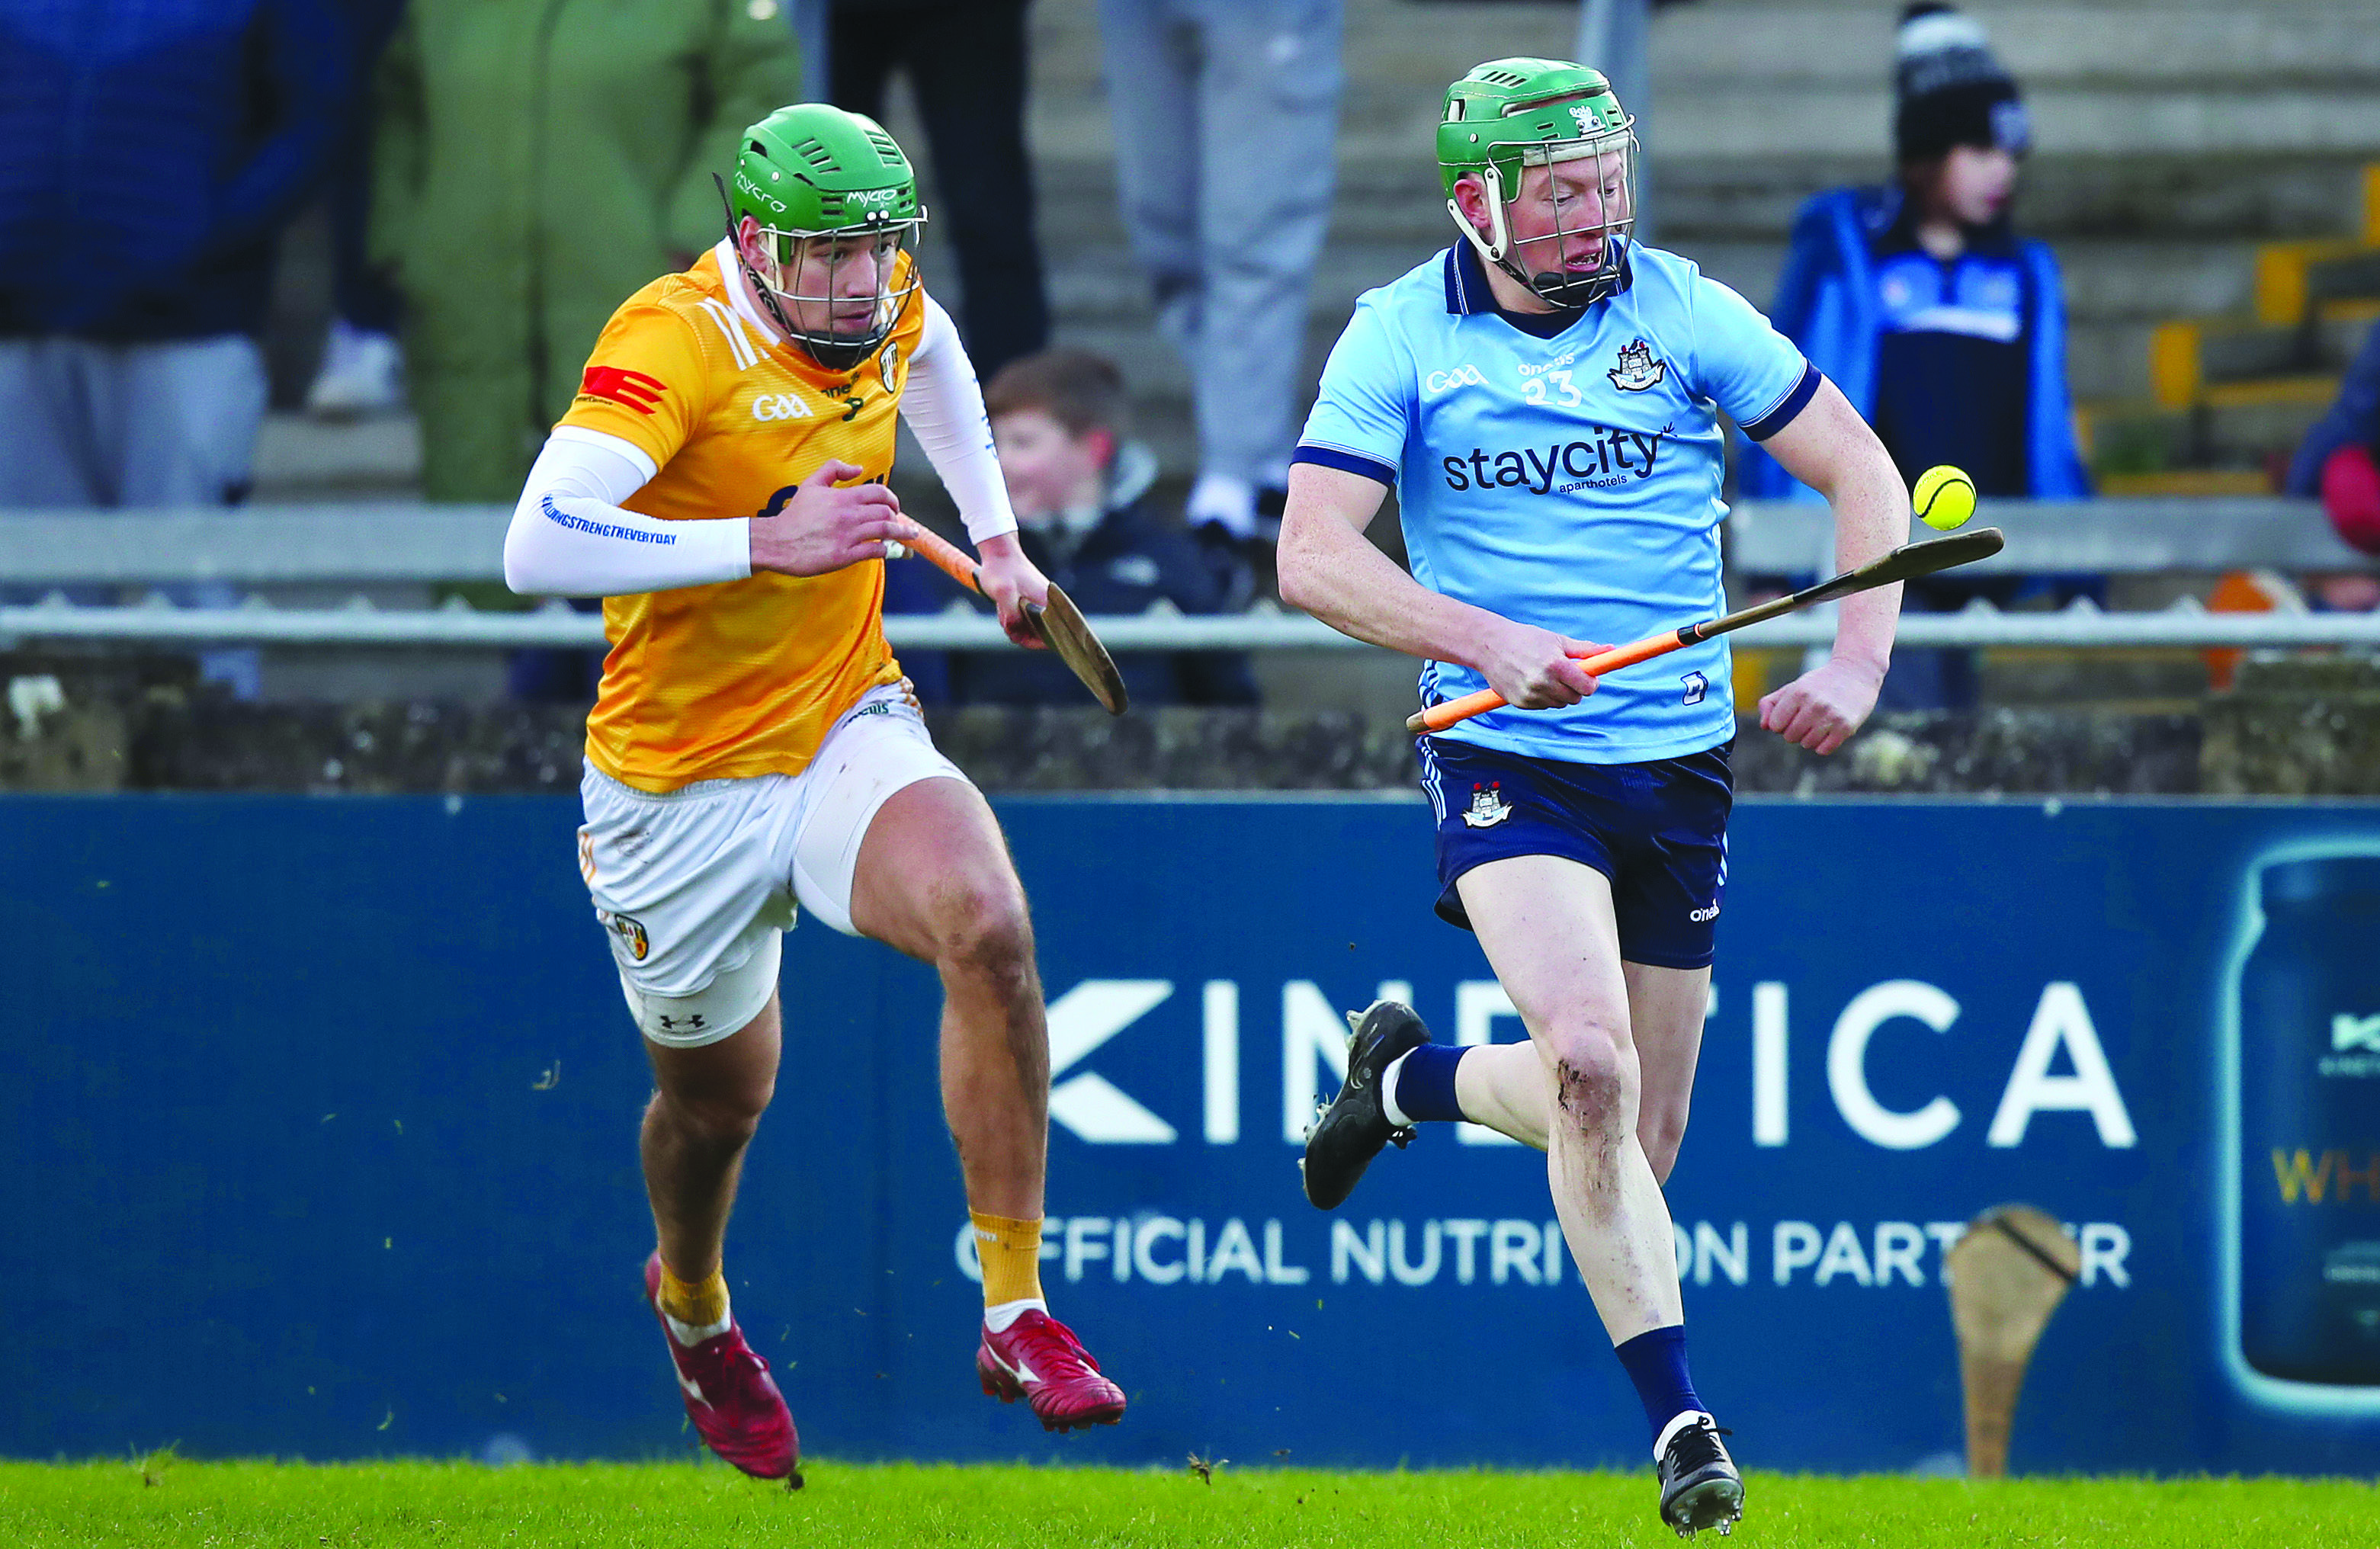 Fergal Whitely steals a march on Conal Bohill during Dublin’s win over Antrim at Parnell Park in January. The Saffrons will be keen to turn the tables at the same venue on Saturday